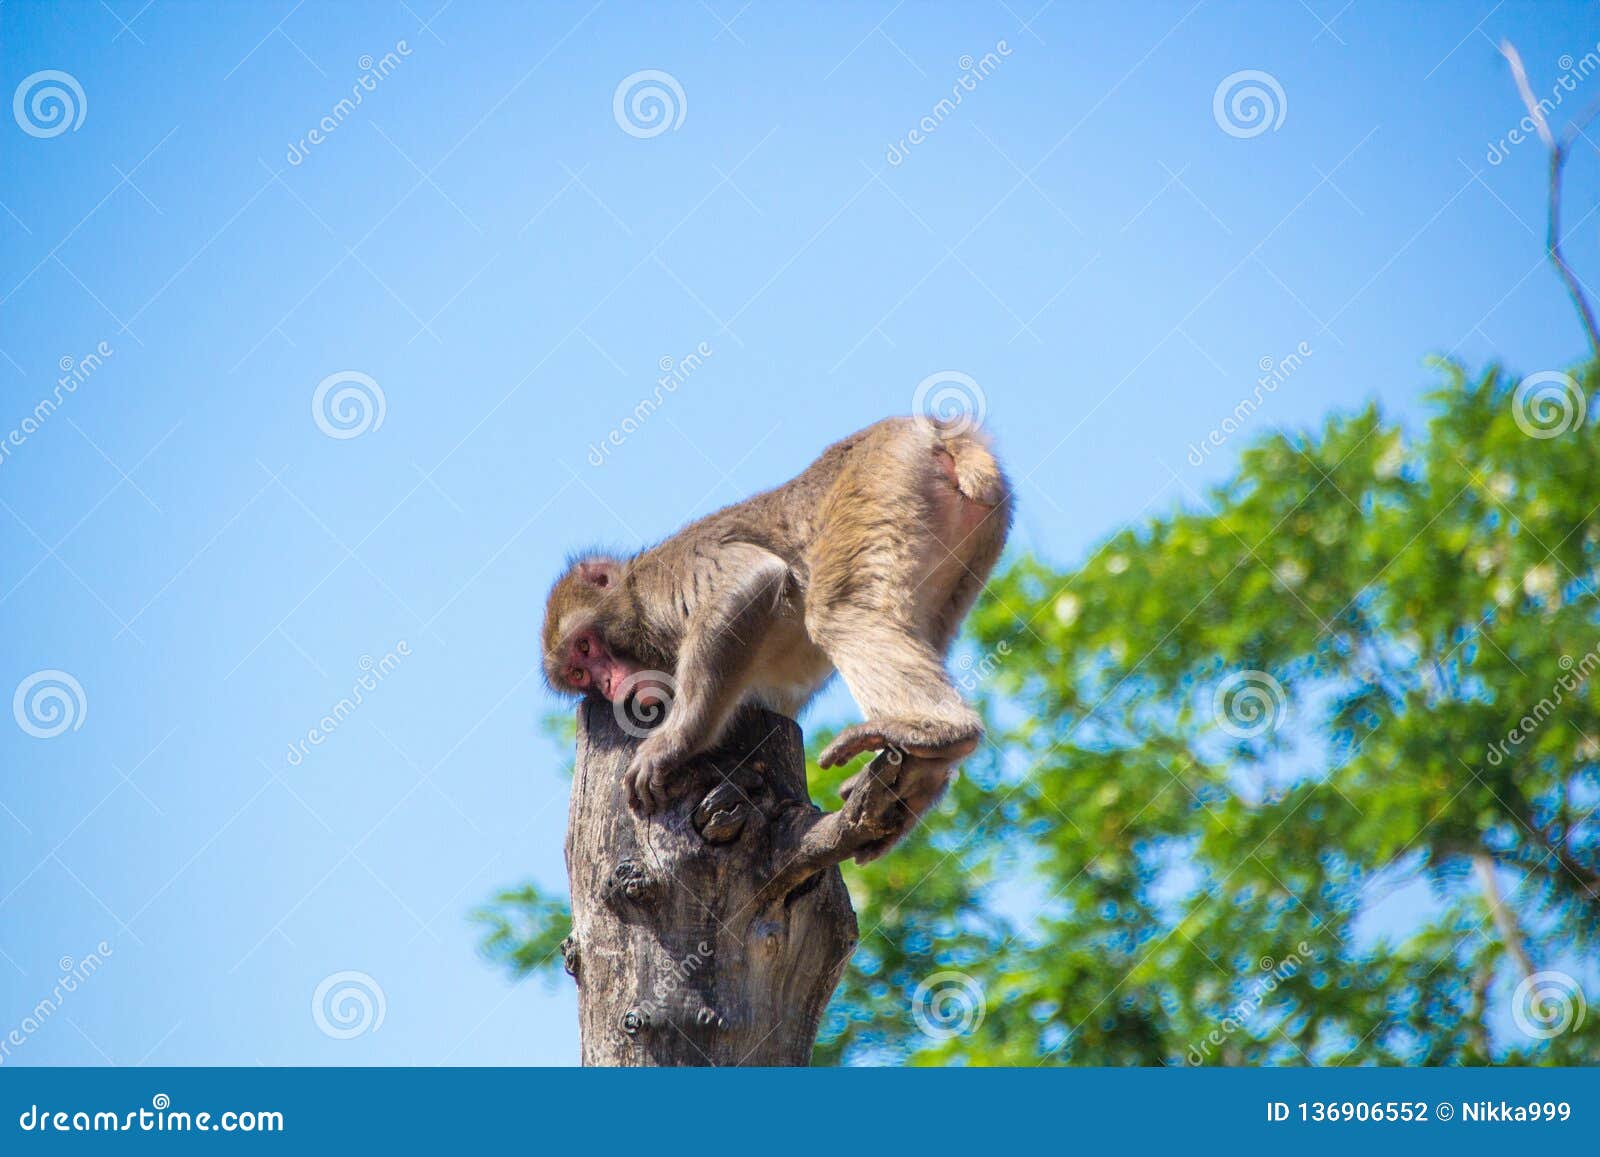 458 Monkey Itching Images, Stock Photos, 3D objects, & Vectors |  Shutterstock